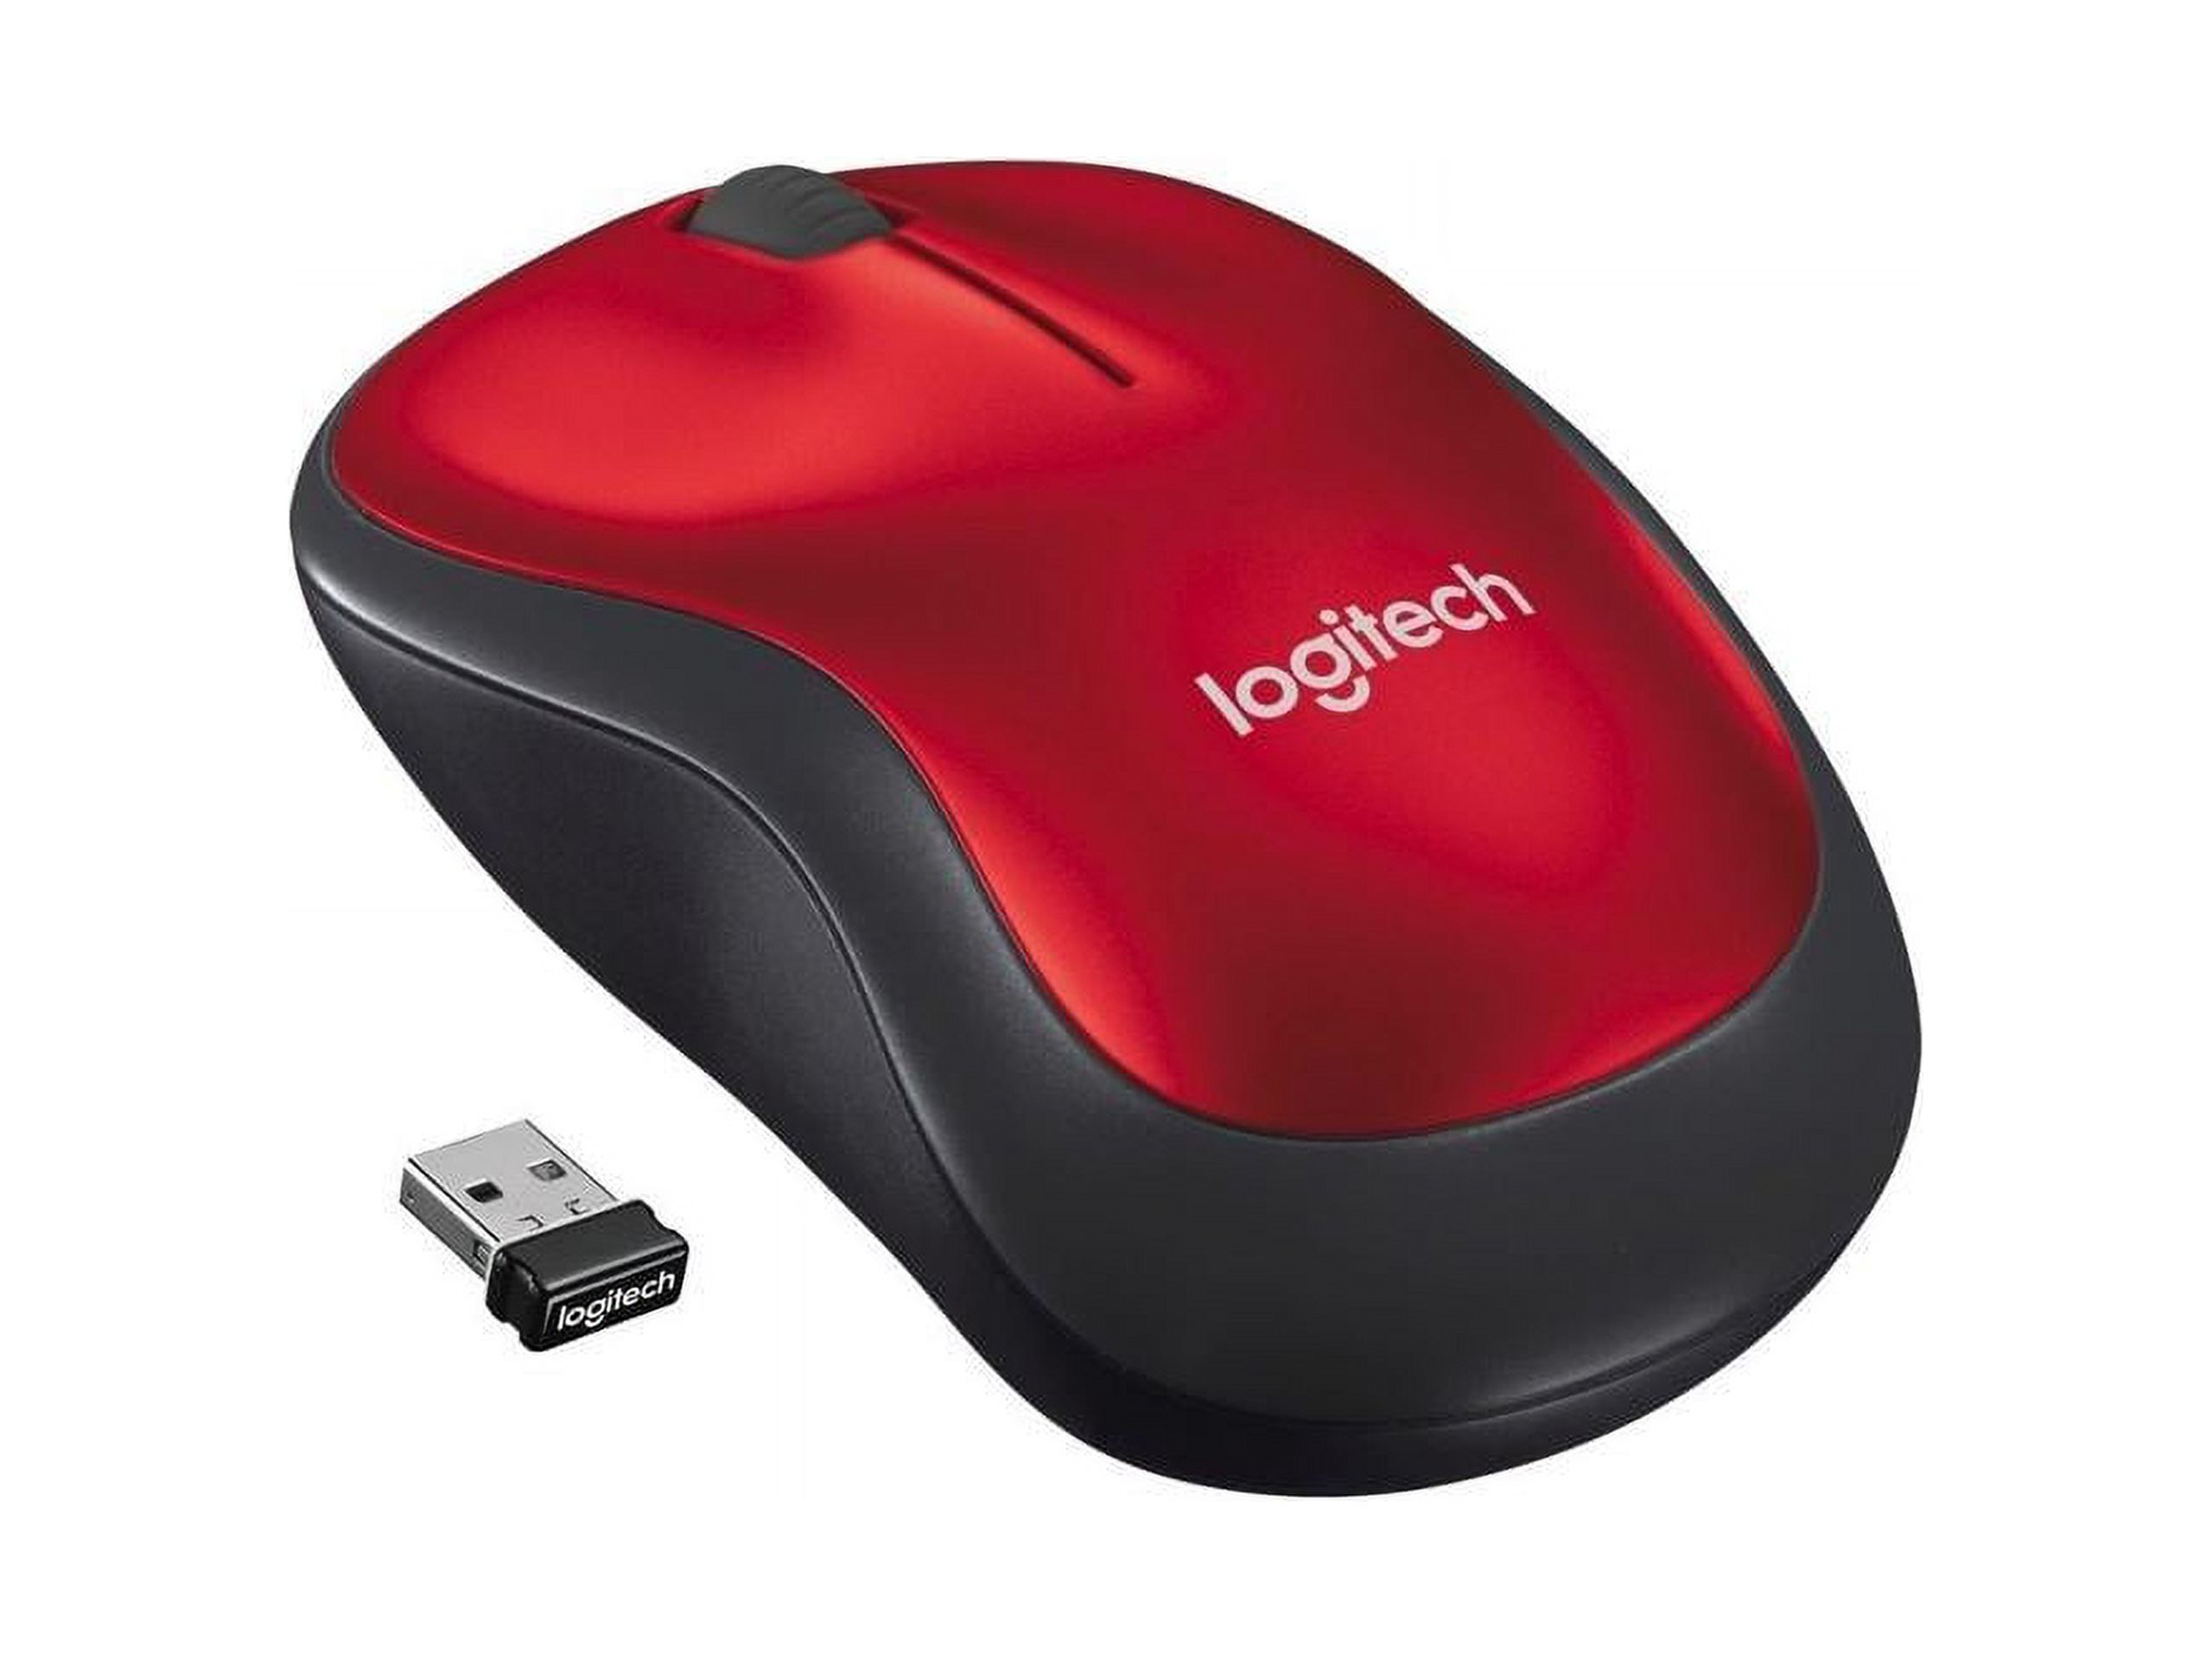 Logitech M185 Wireless Mouse, 2.4GHz with USB Mini Receiver, Ambidextrous, Red - image 4 of 15